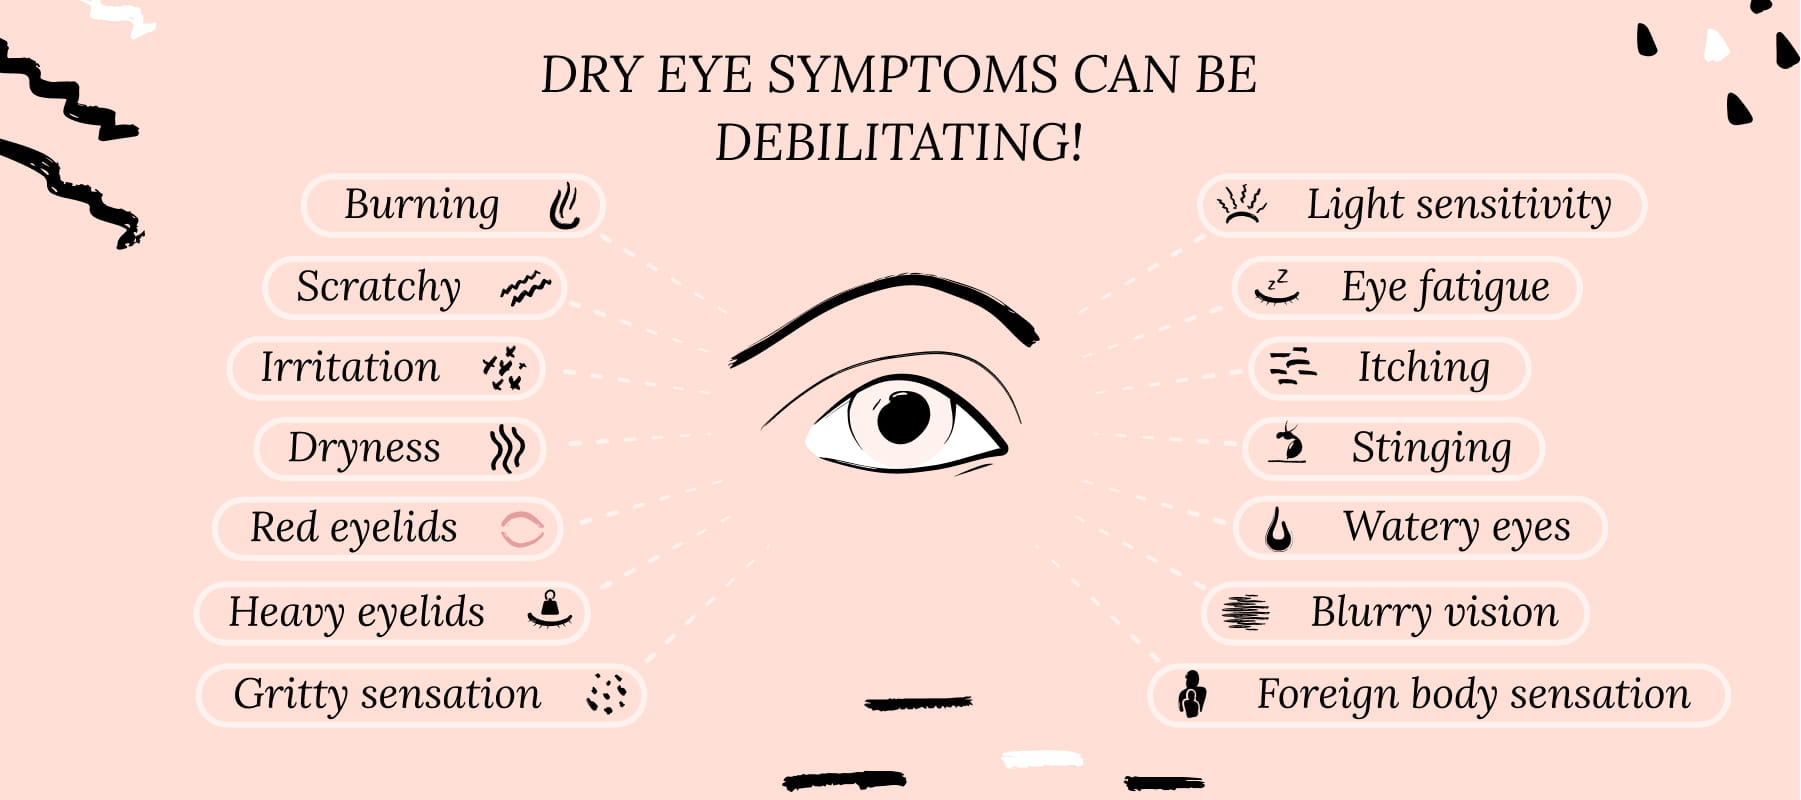 What are the Symptoms of Dry Eye? Burning, Scratchy, Irritation, dryness, red eyelids, heavy eyelids, gritty sensation, light sensitivity, eye fatigue, itching, stinging, watery eyes, blurry vision, foreign body sensation